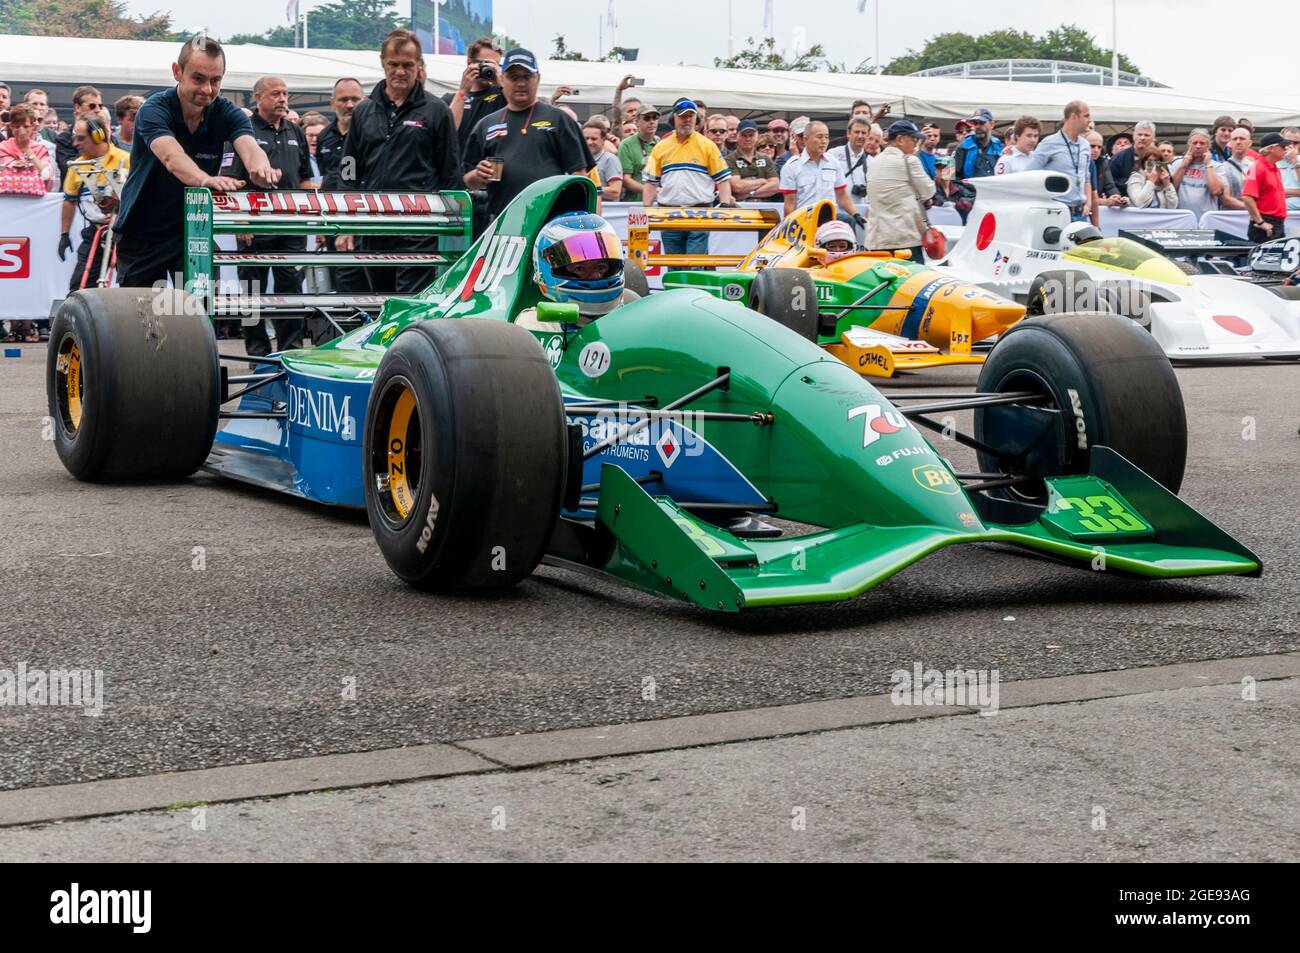 Jordan 191 Formula Grand Prix racing car at the Goodwood Festival of Speed motor racing event 2014. 1991 race in assembly for race Stock Photo - Alamy